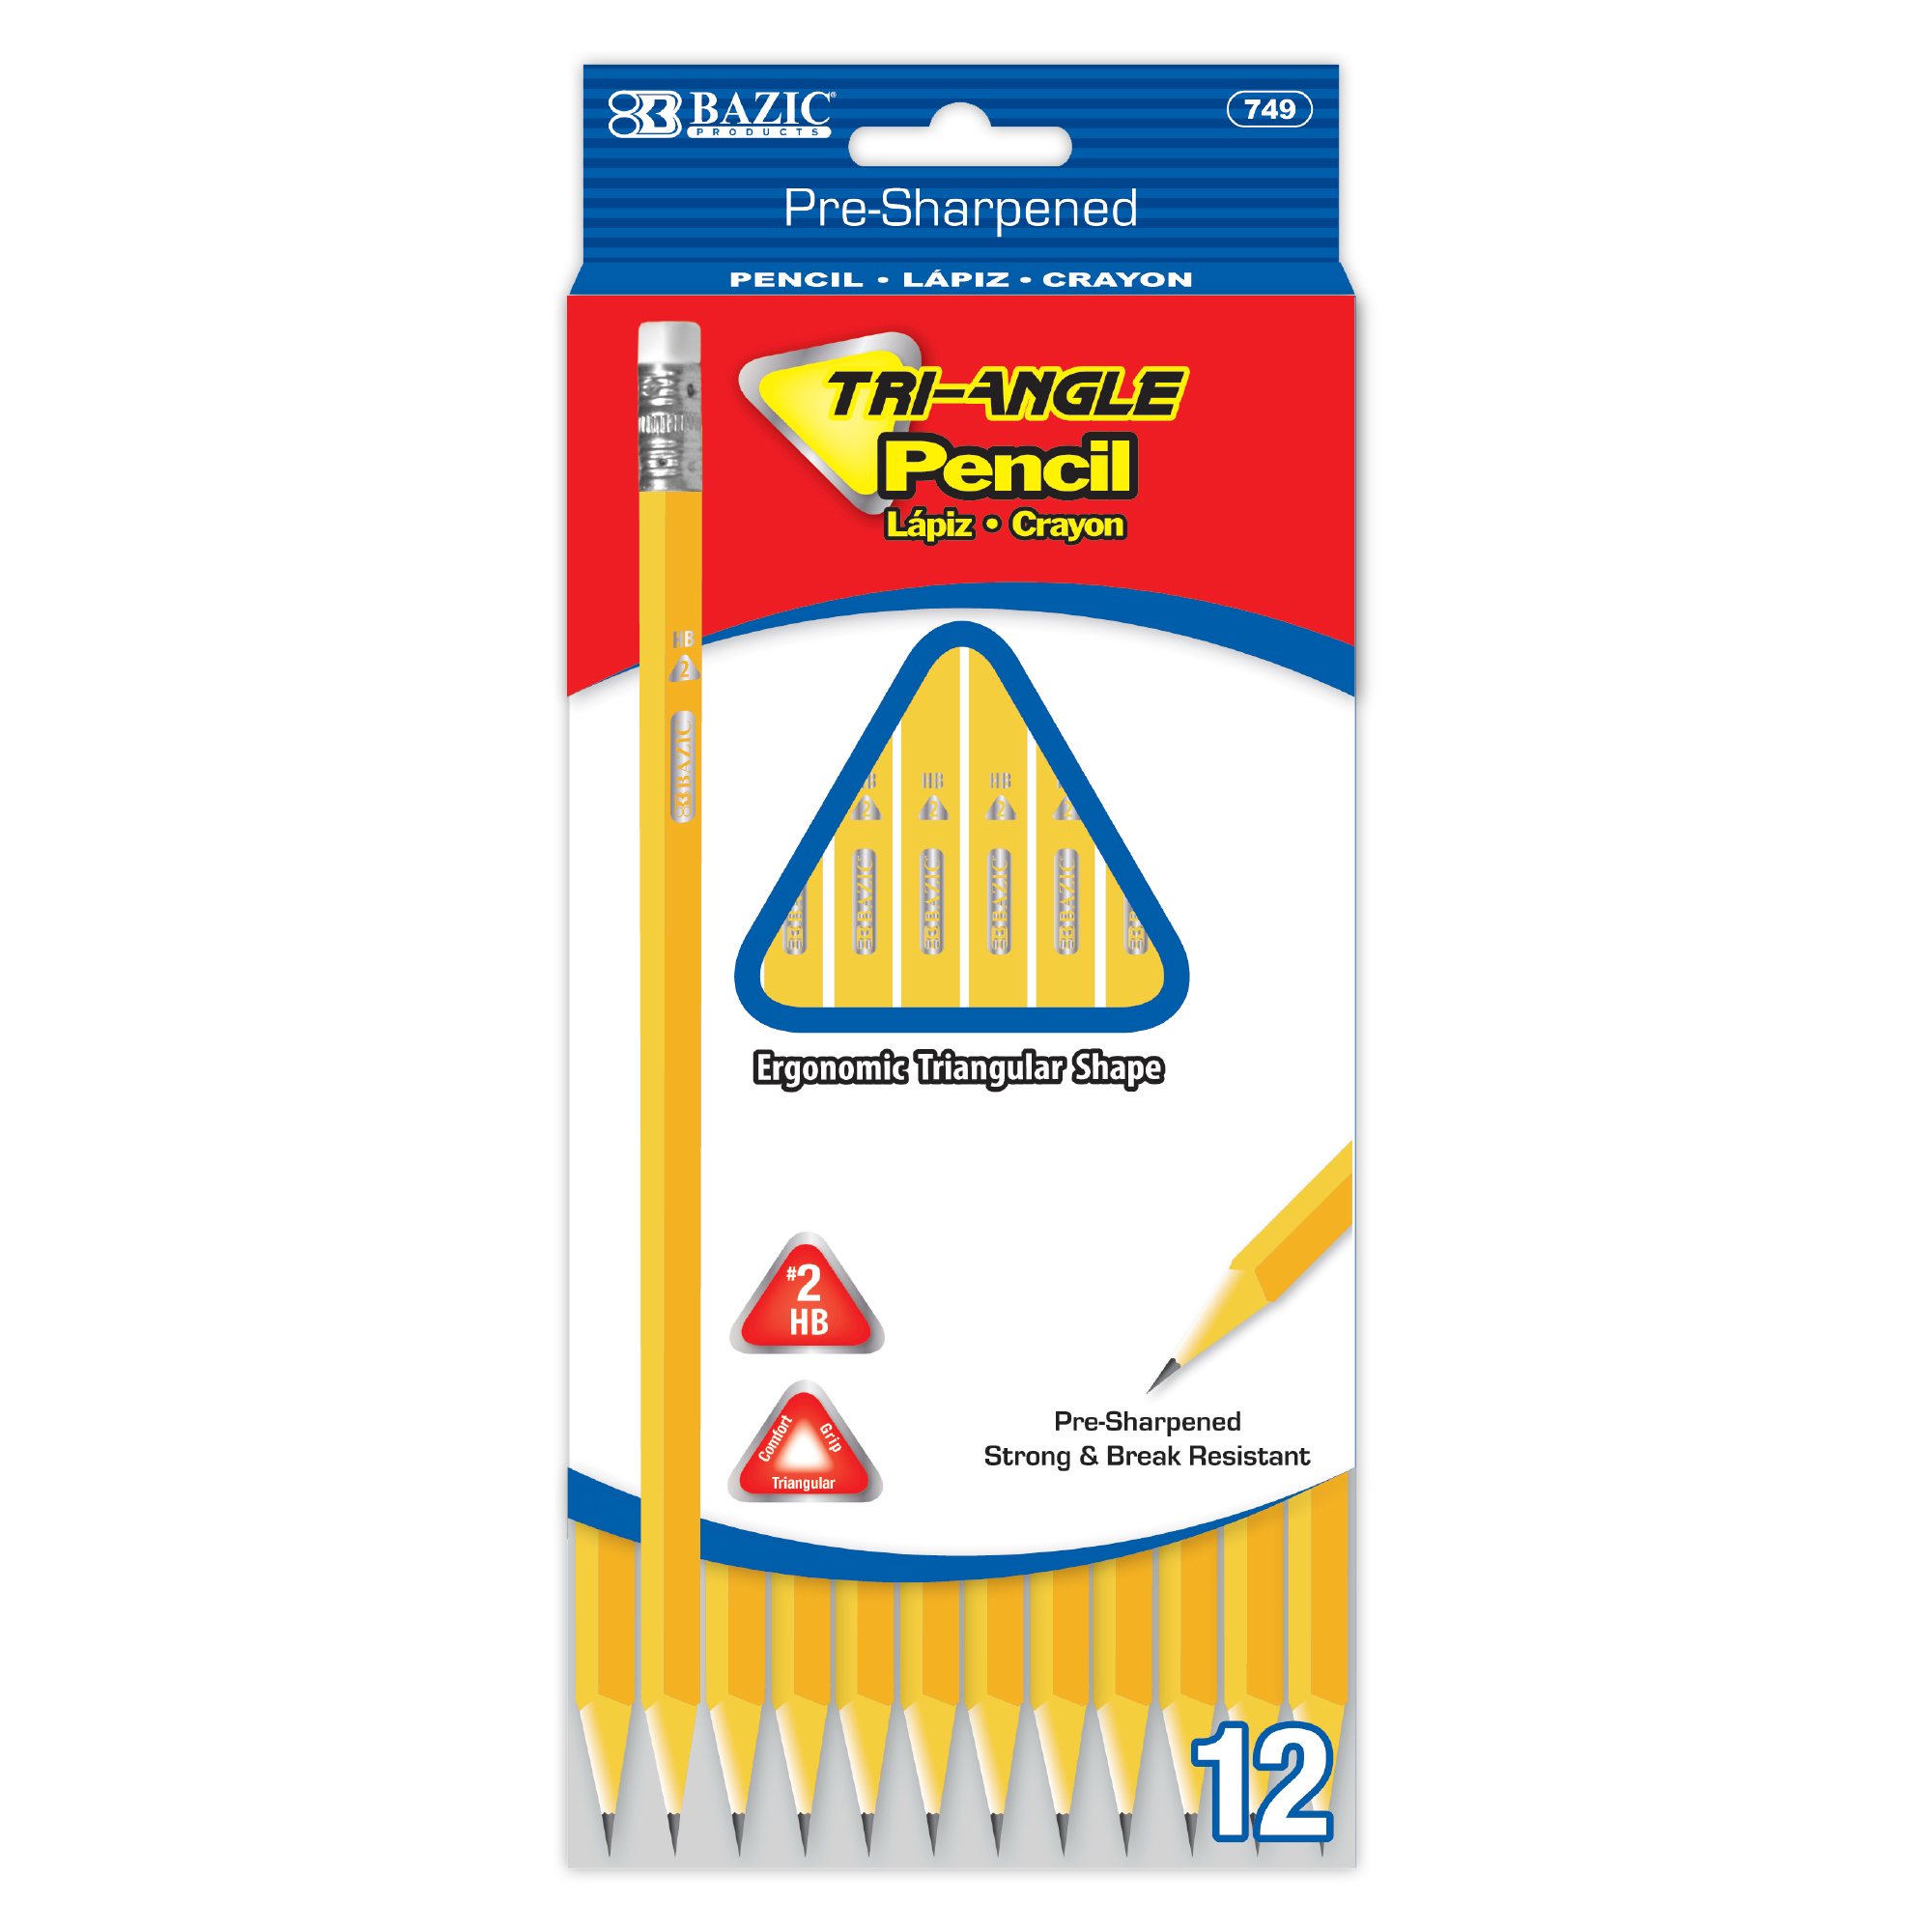 [Wood] Yellow Pencil #2 Triangle (12/Pack)